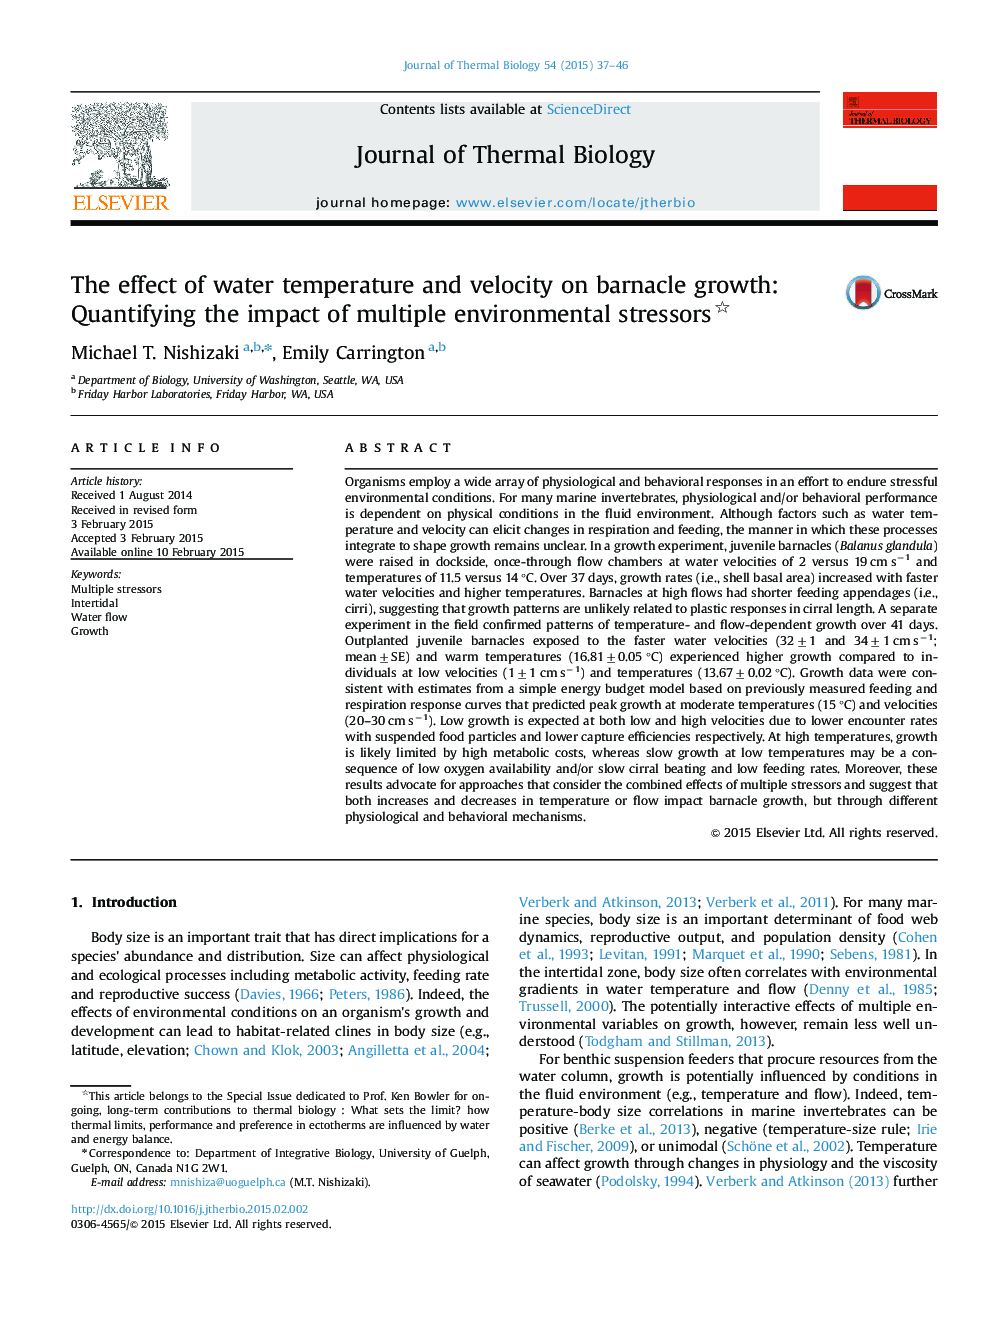 The effect of water temperature and velocity on barnacle growth: Quantifying the impact of multiple environmental stressors 